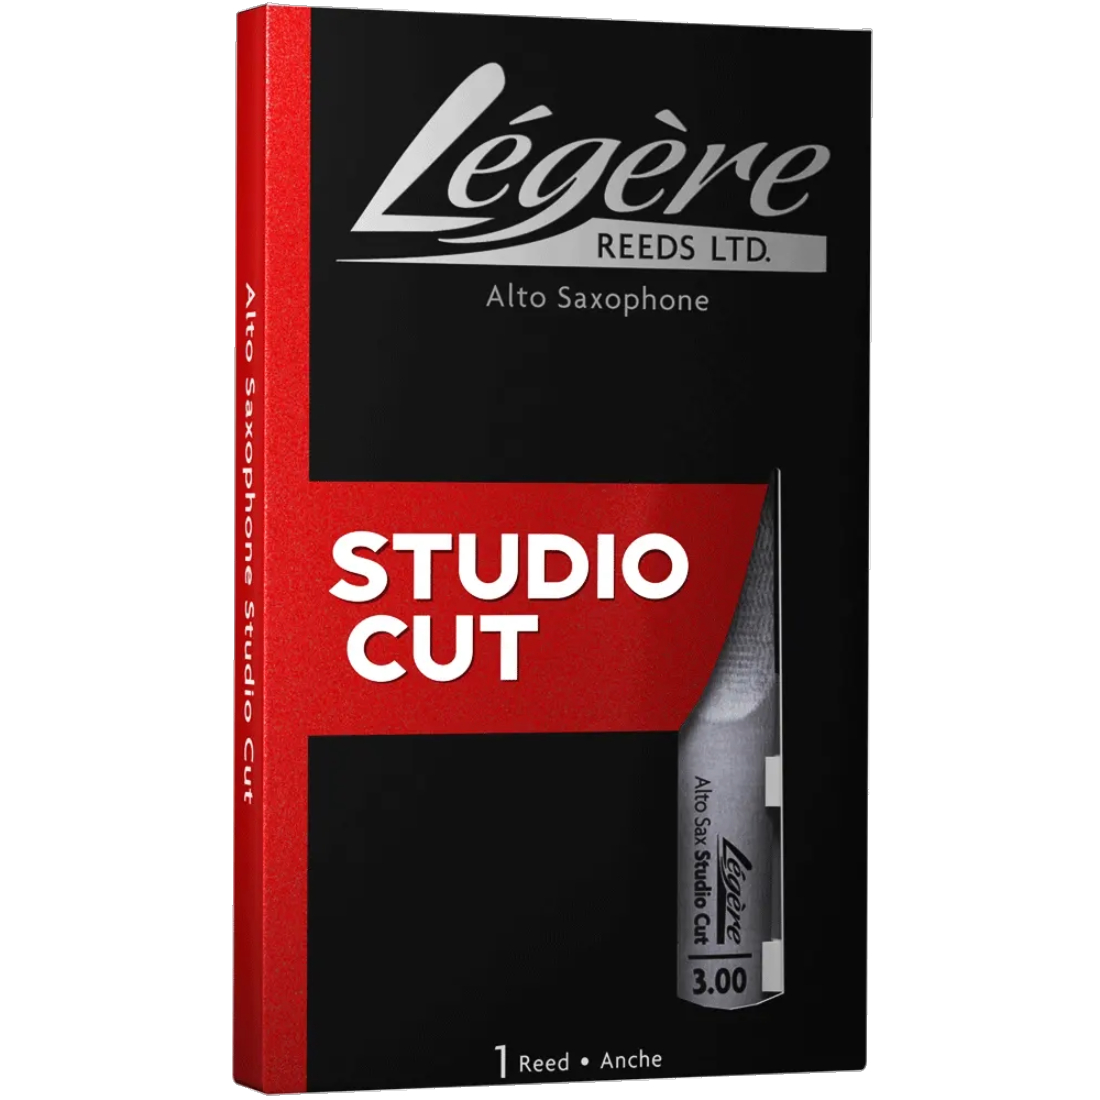 Black and red box of studio cut Legere synthetic alto sax reeds